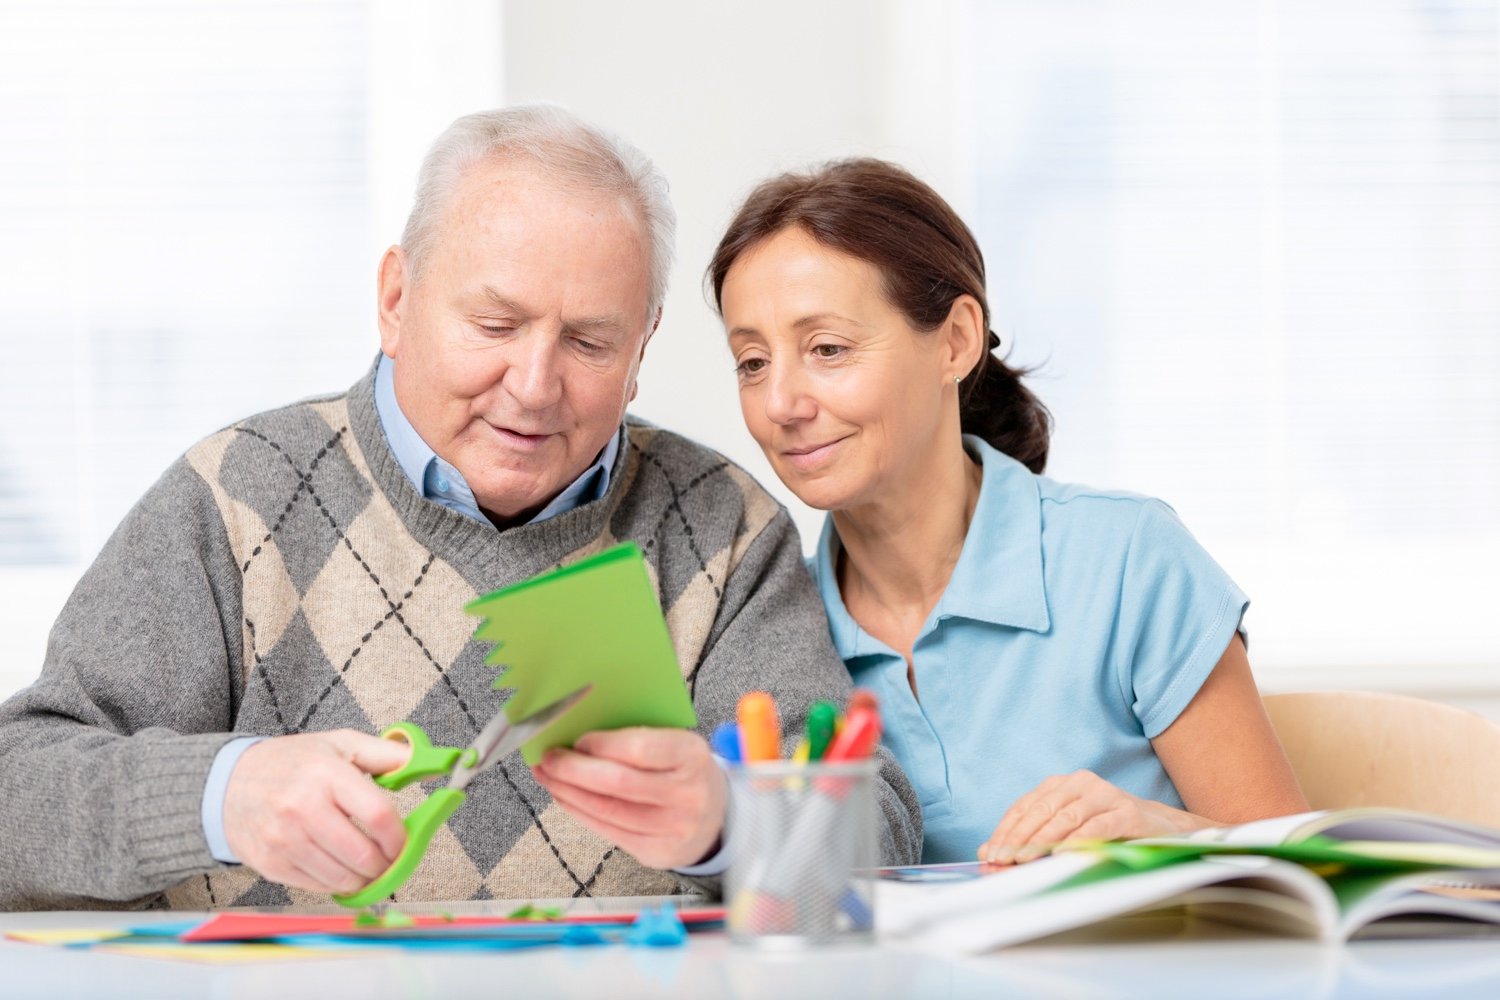 A team member helping a senior resident with paper crafts